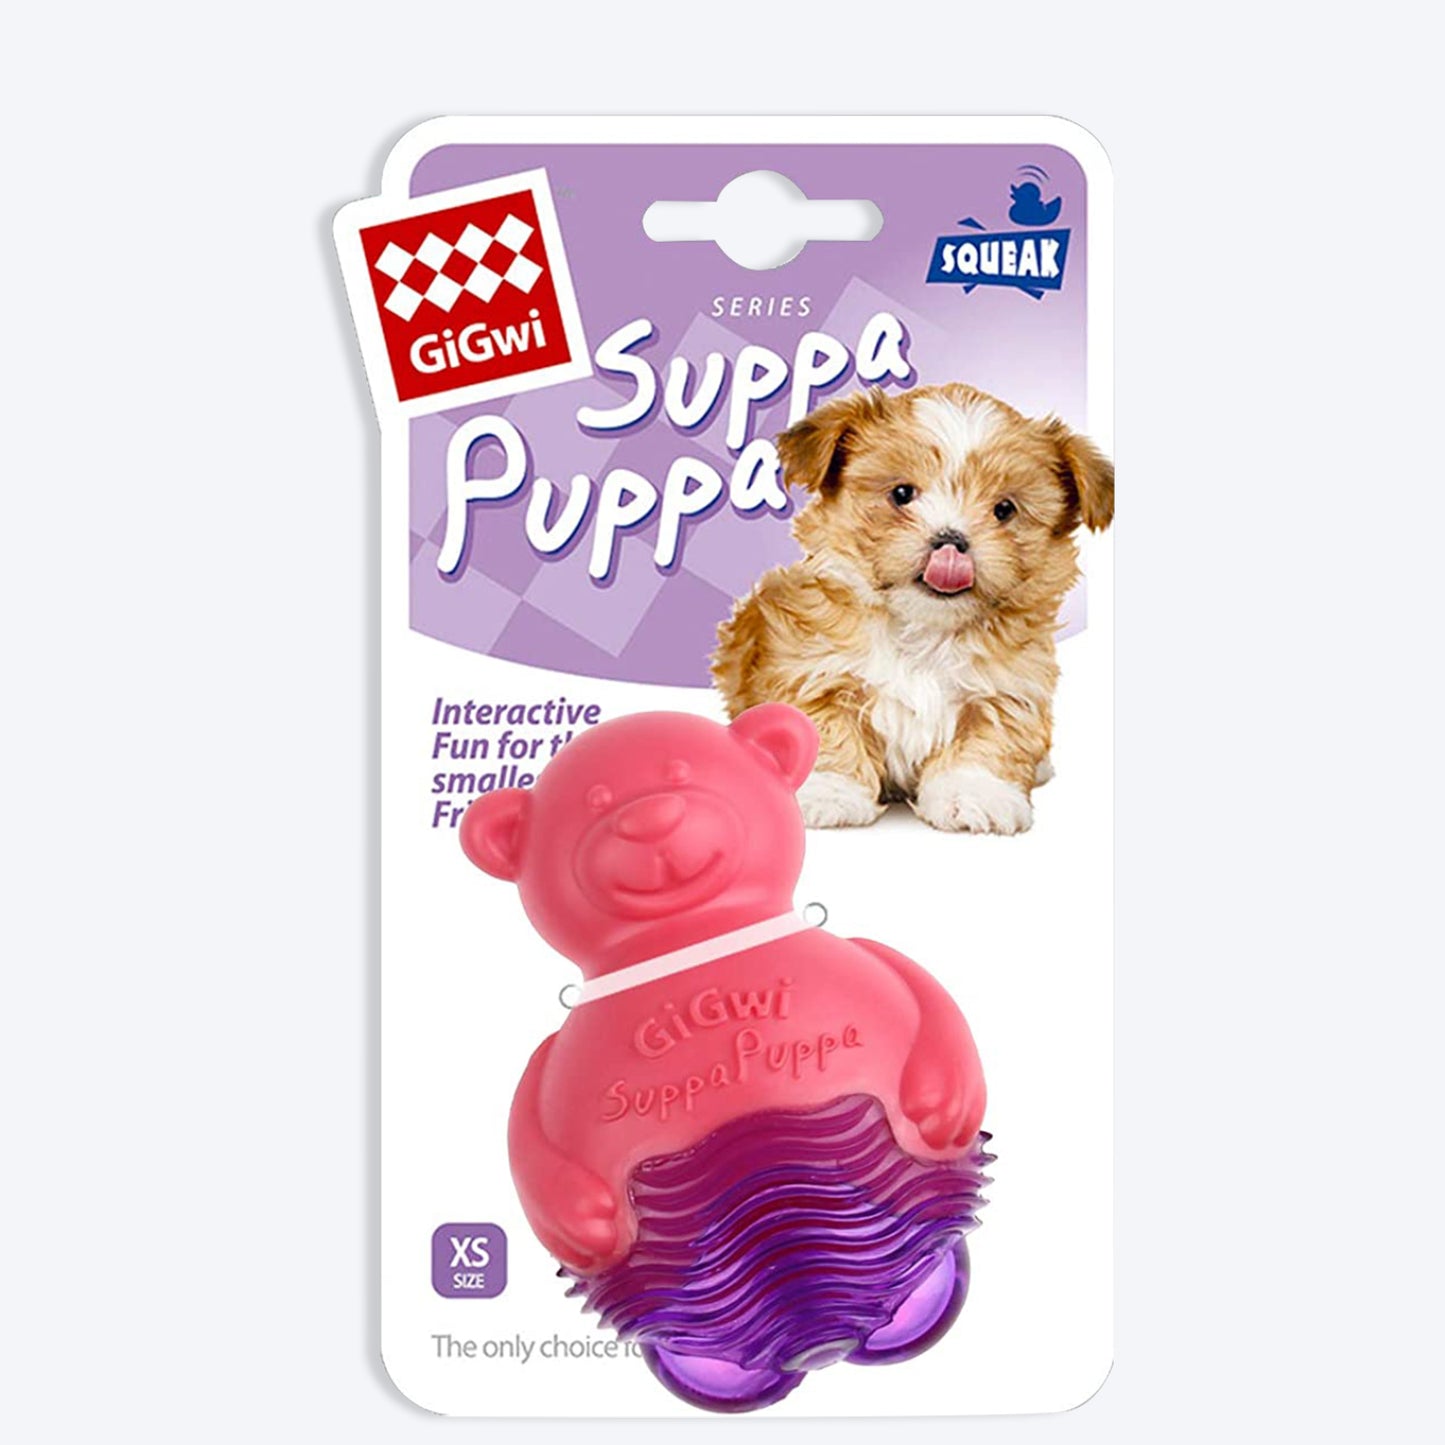 GiGwi Suppa Puppa Dog Toy - Bear - Pink/Purple - Heads Up For Tails